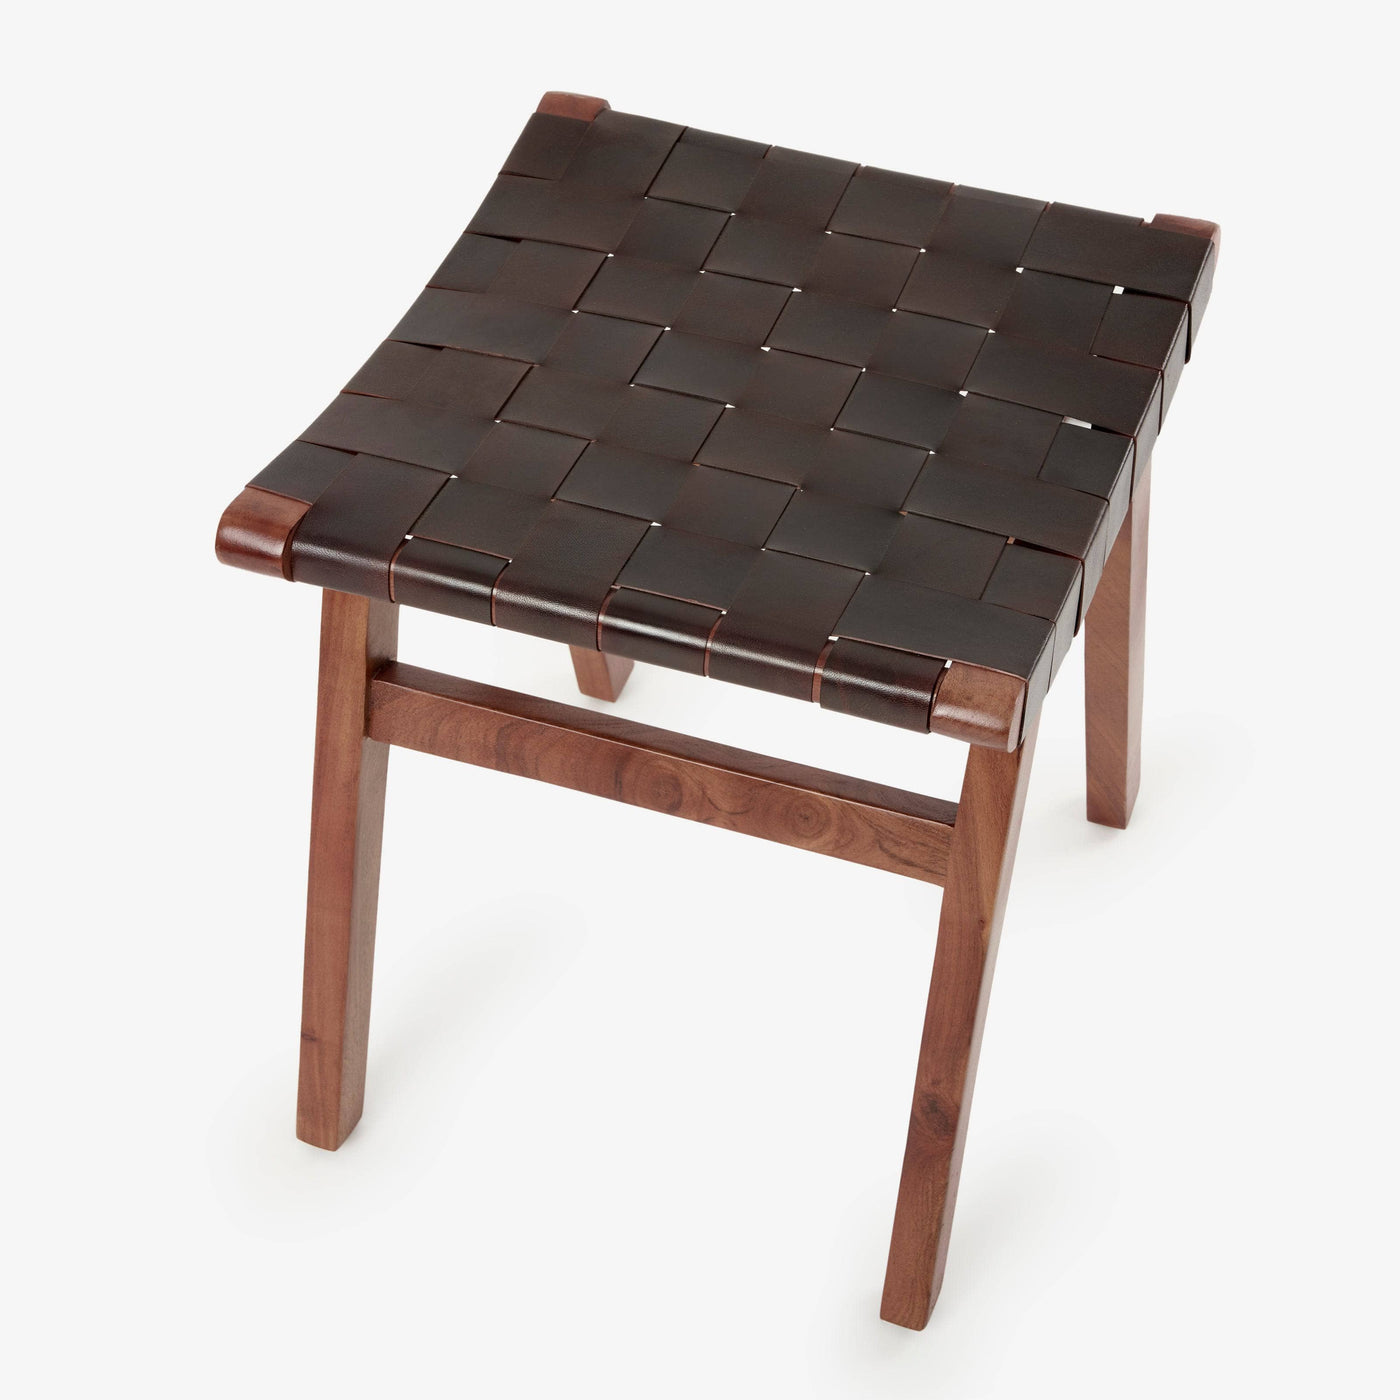 Liscia Woven Leather Stool, Brown Ottomans & Footstools sazy.com